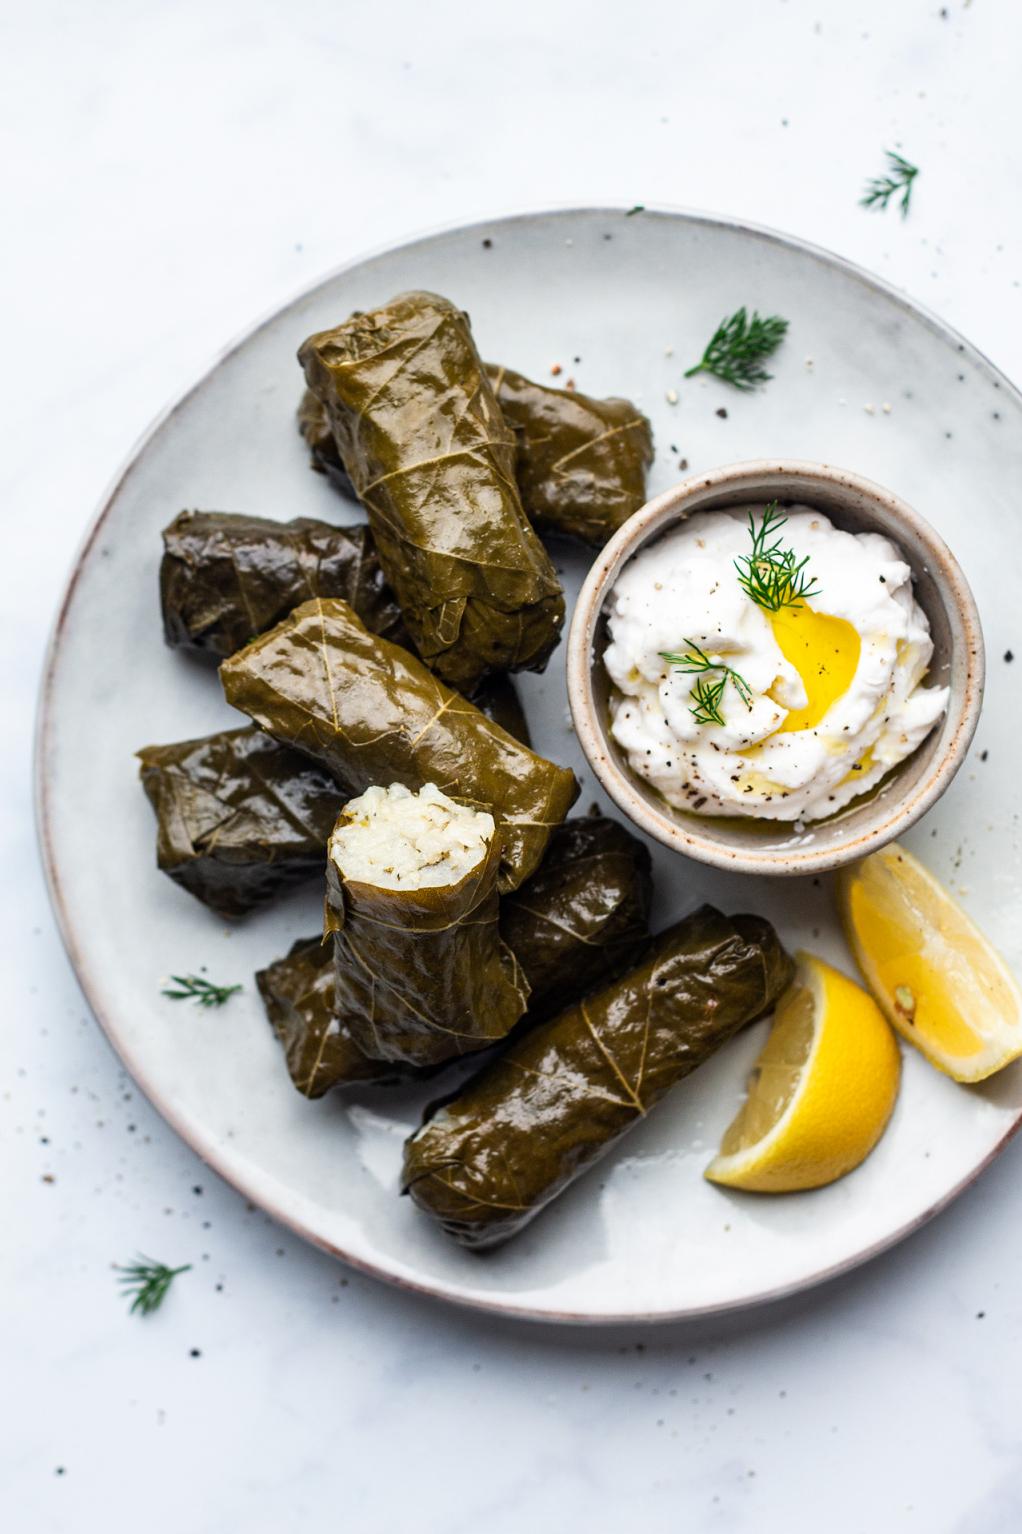  Each bite of these stuffed grape leaves melts in your mouth and delights your taste buds.